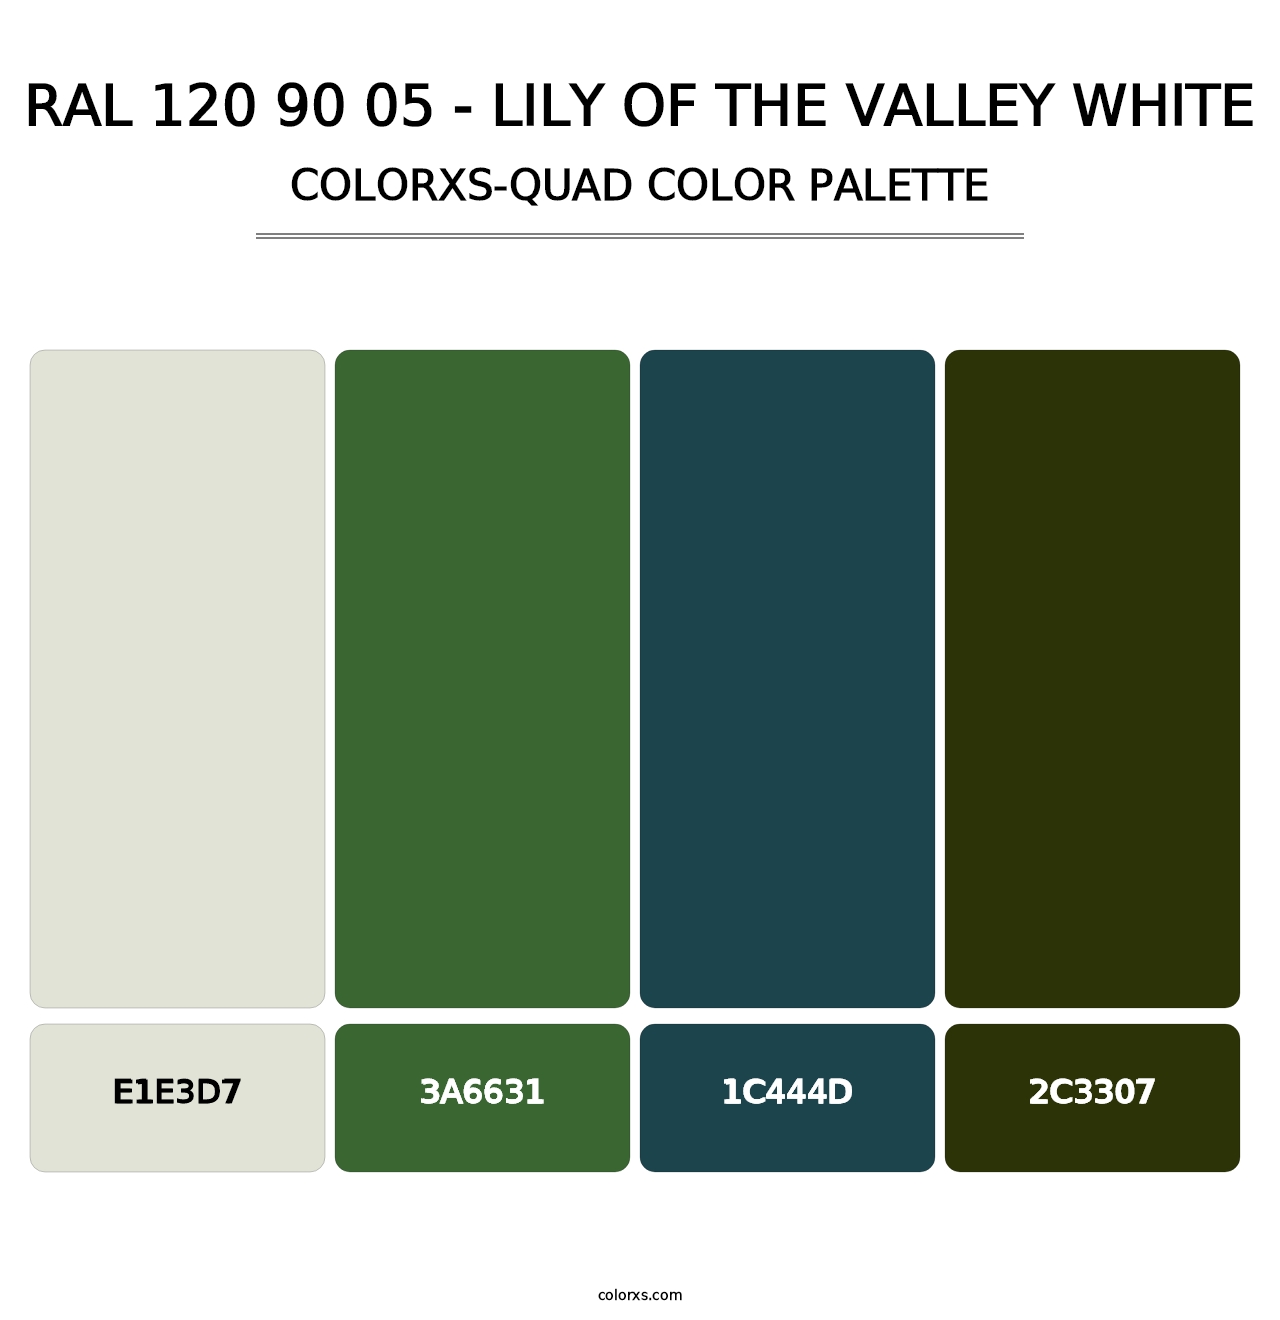 RAL 120 90 05 - Lily of the Valley White - Colorxs Quad Palette